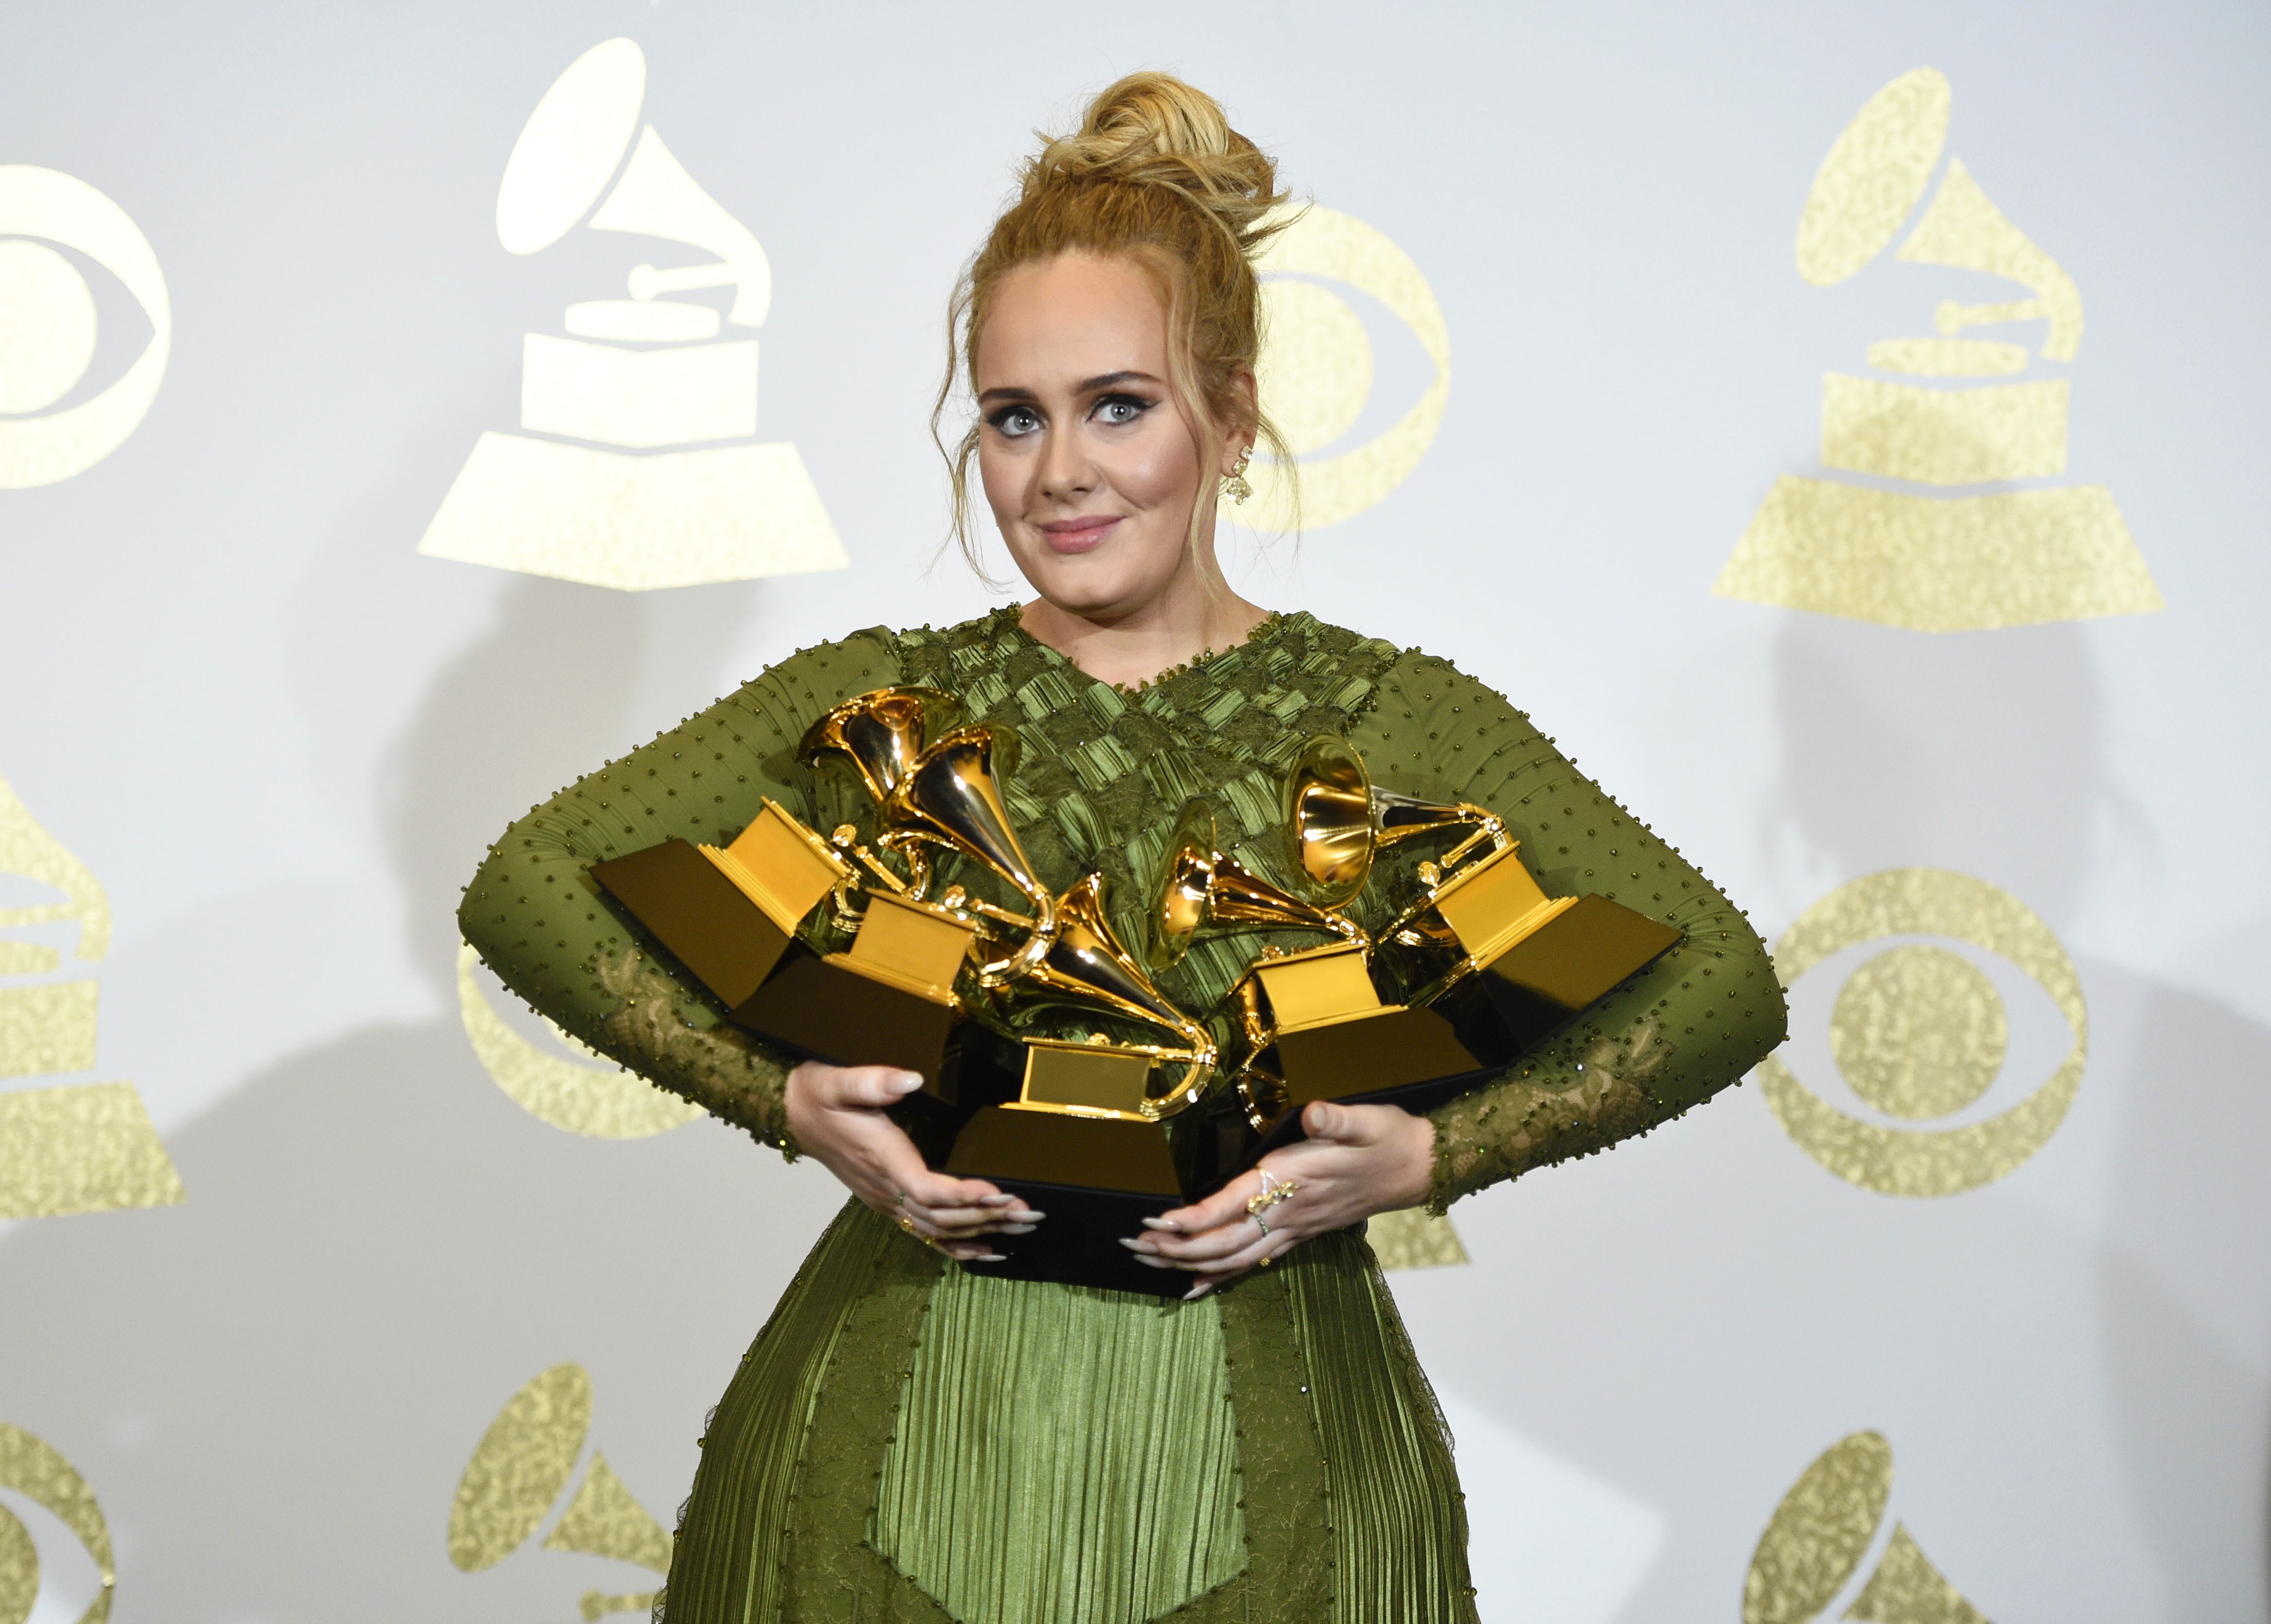 Adele poses in the press room with the awards for album of the year for '25', song of the year for 'Hello', record of the year for 'Hello', best pop solo performance for 'Hello', and best pop vocal album for '25' at the 59th annual Grammy Awards at the Staples Center on in Los Angeles- AP